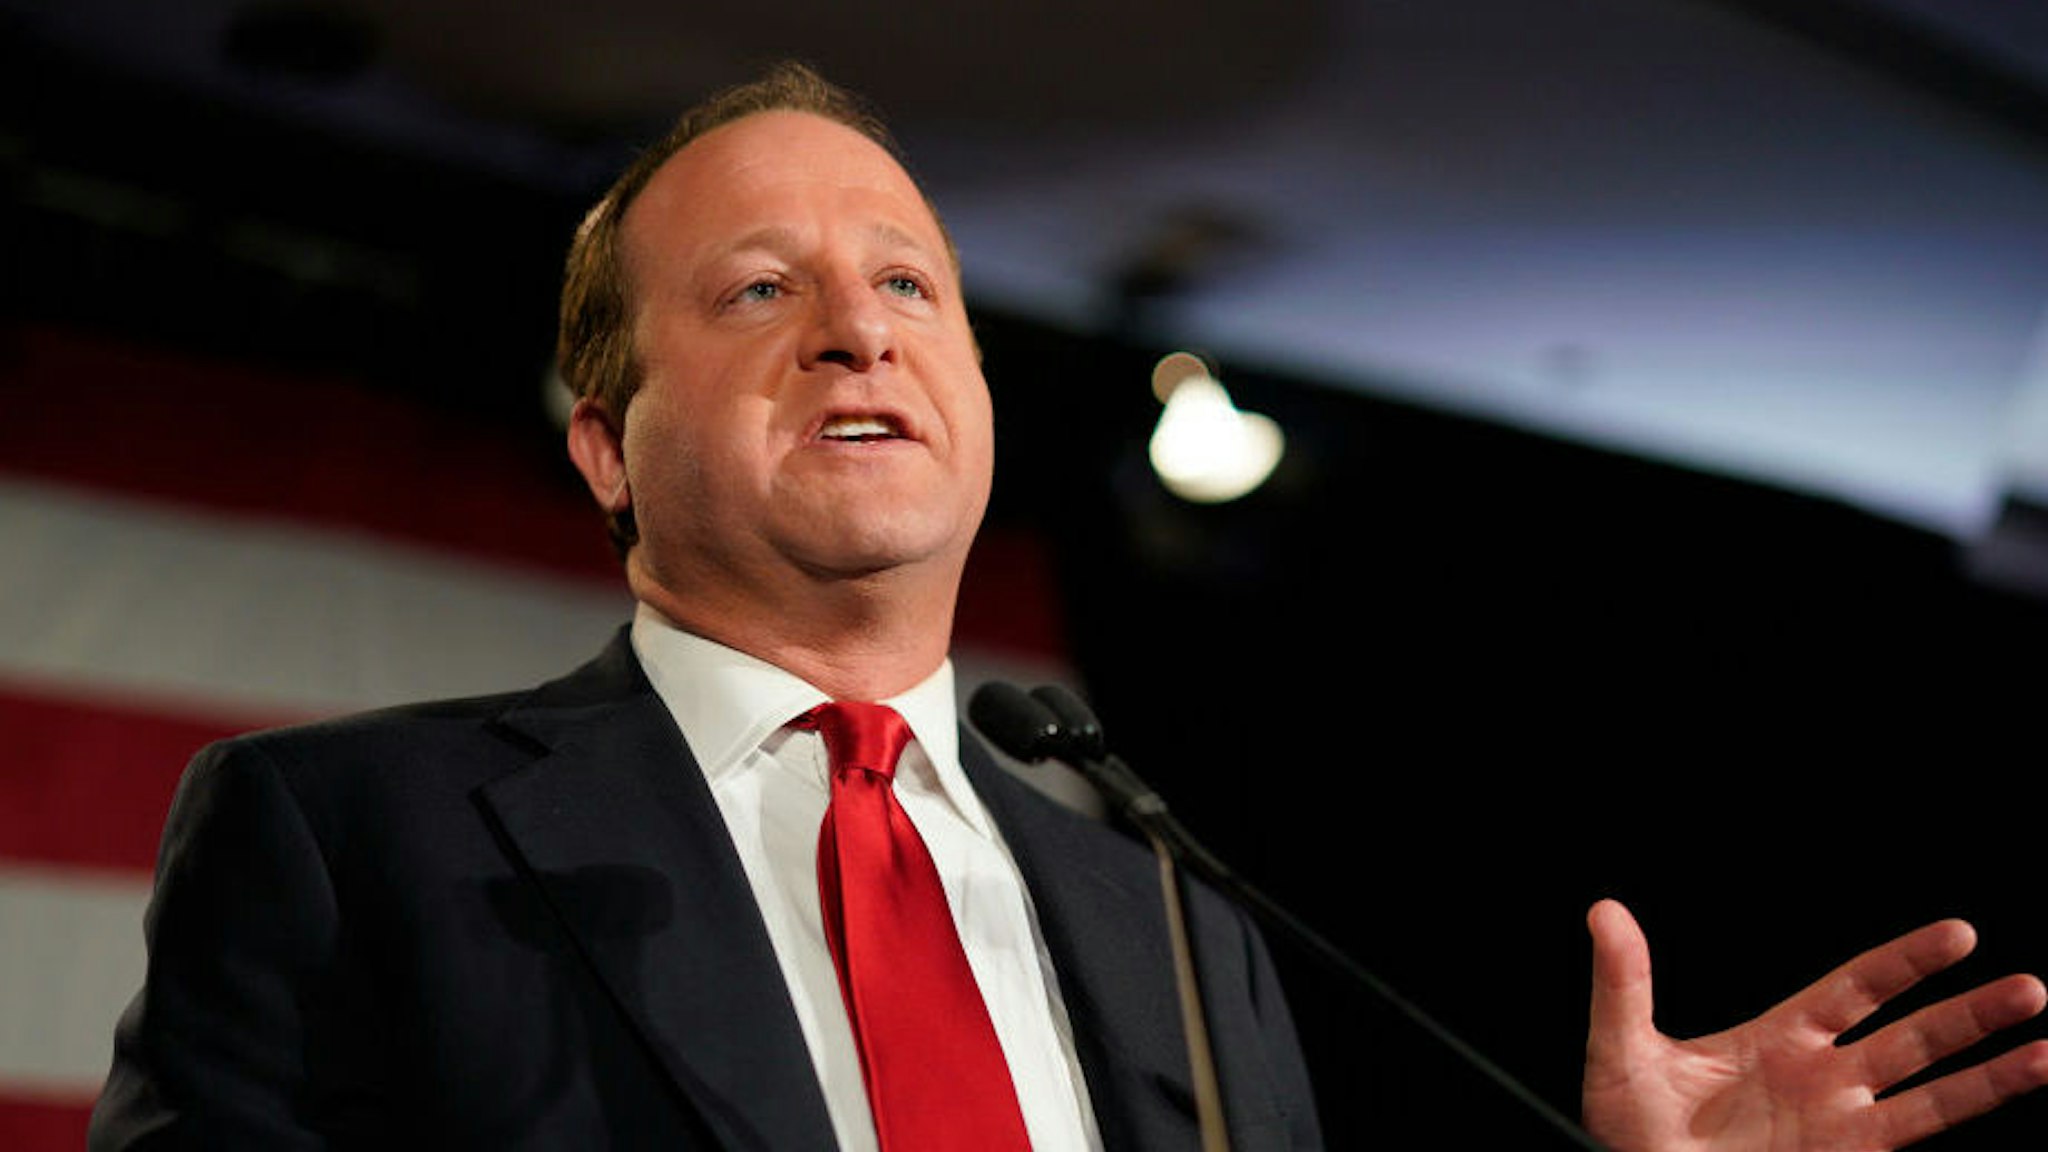 Democratic Colorado Governor-elect Jared Polis speaks at an election night rally on November 6, 2018 in Denver, Colorado. Polis defeated incumbent Republican Walker Stapleton to become the first openly gay man elected Governor in the country. (Photo by Rick T. Wilking/Getty Images)